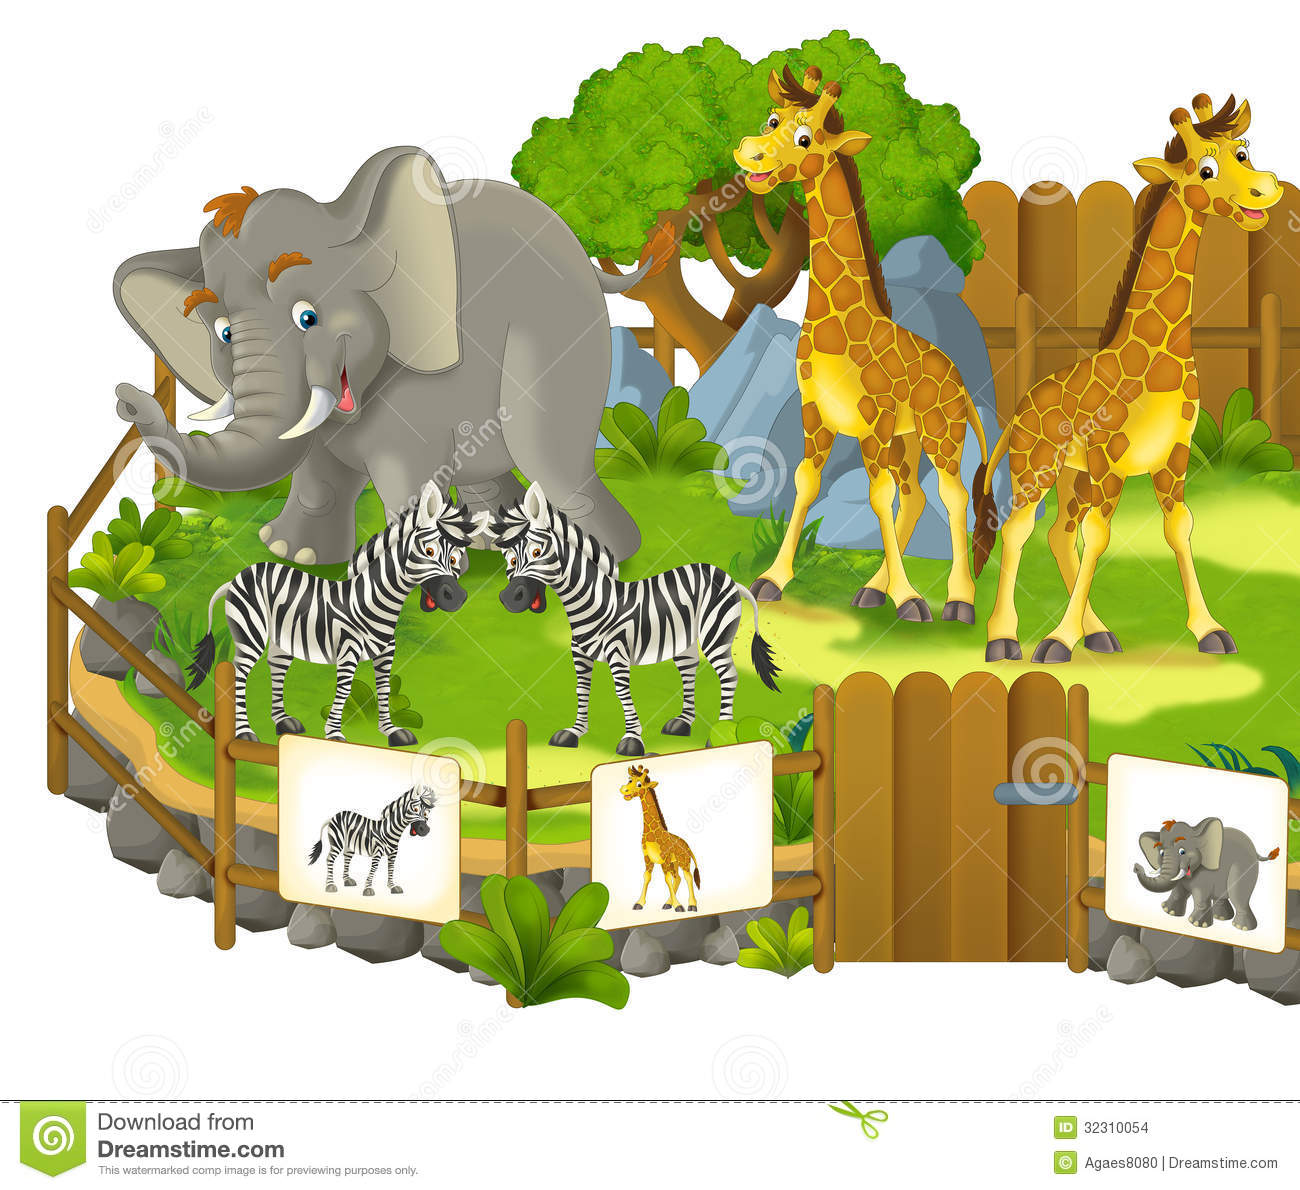 Zoo clipart clipart.